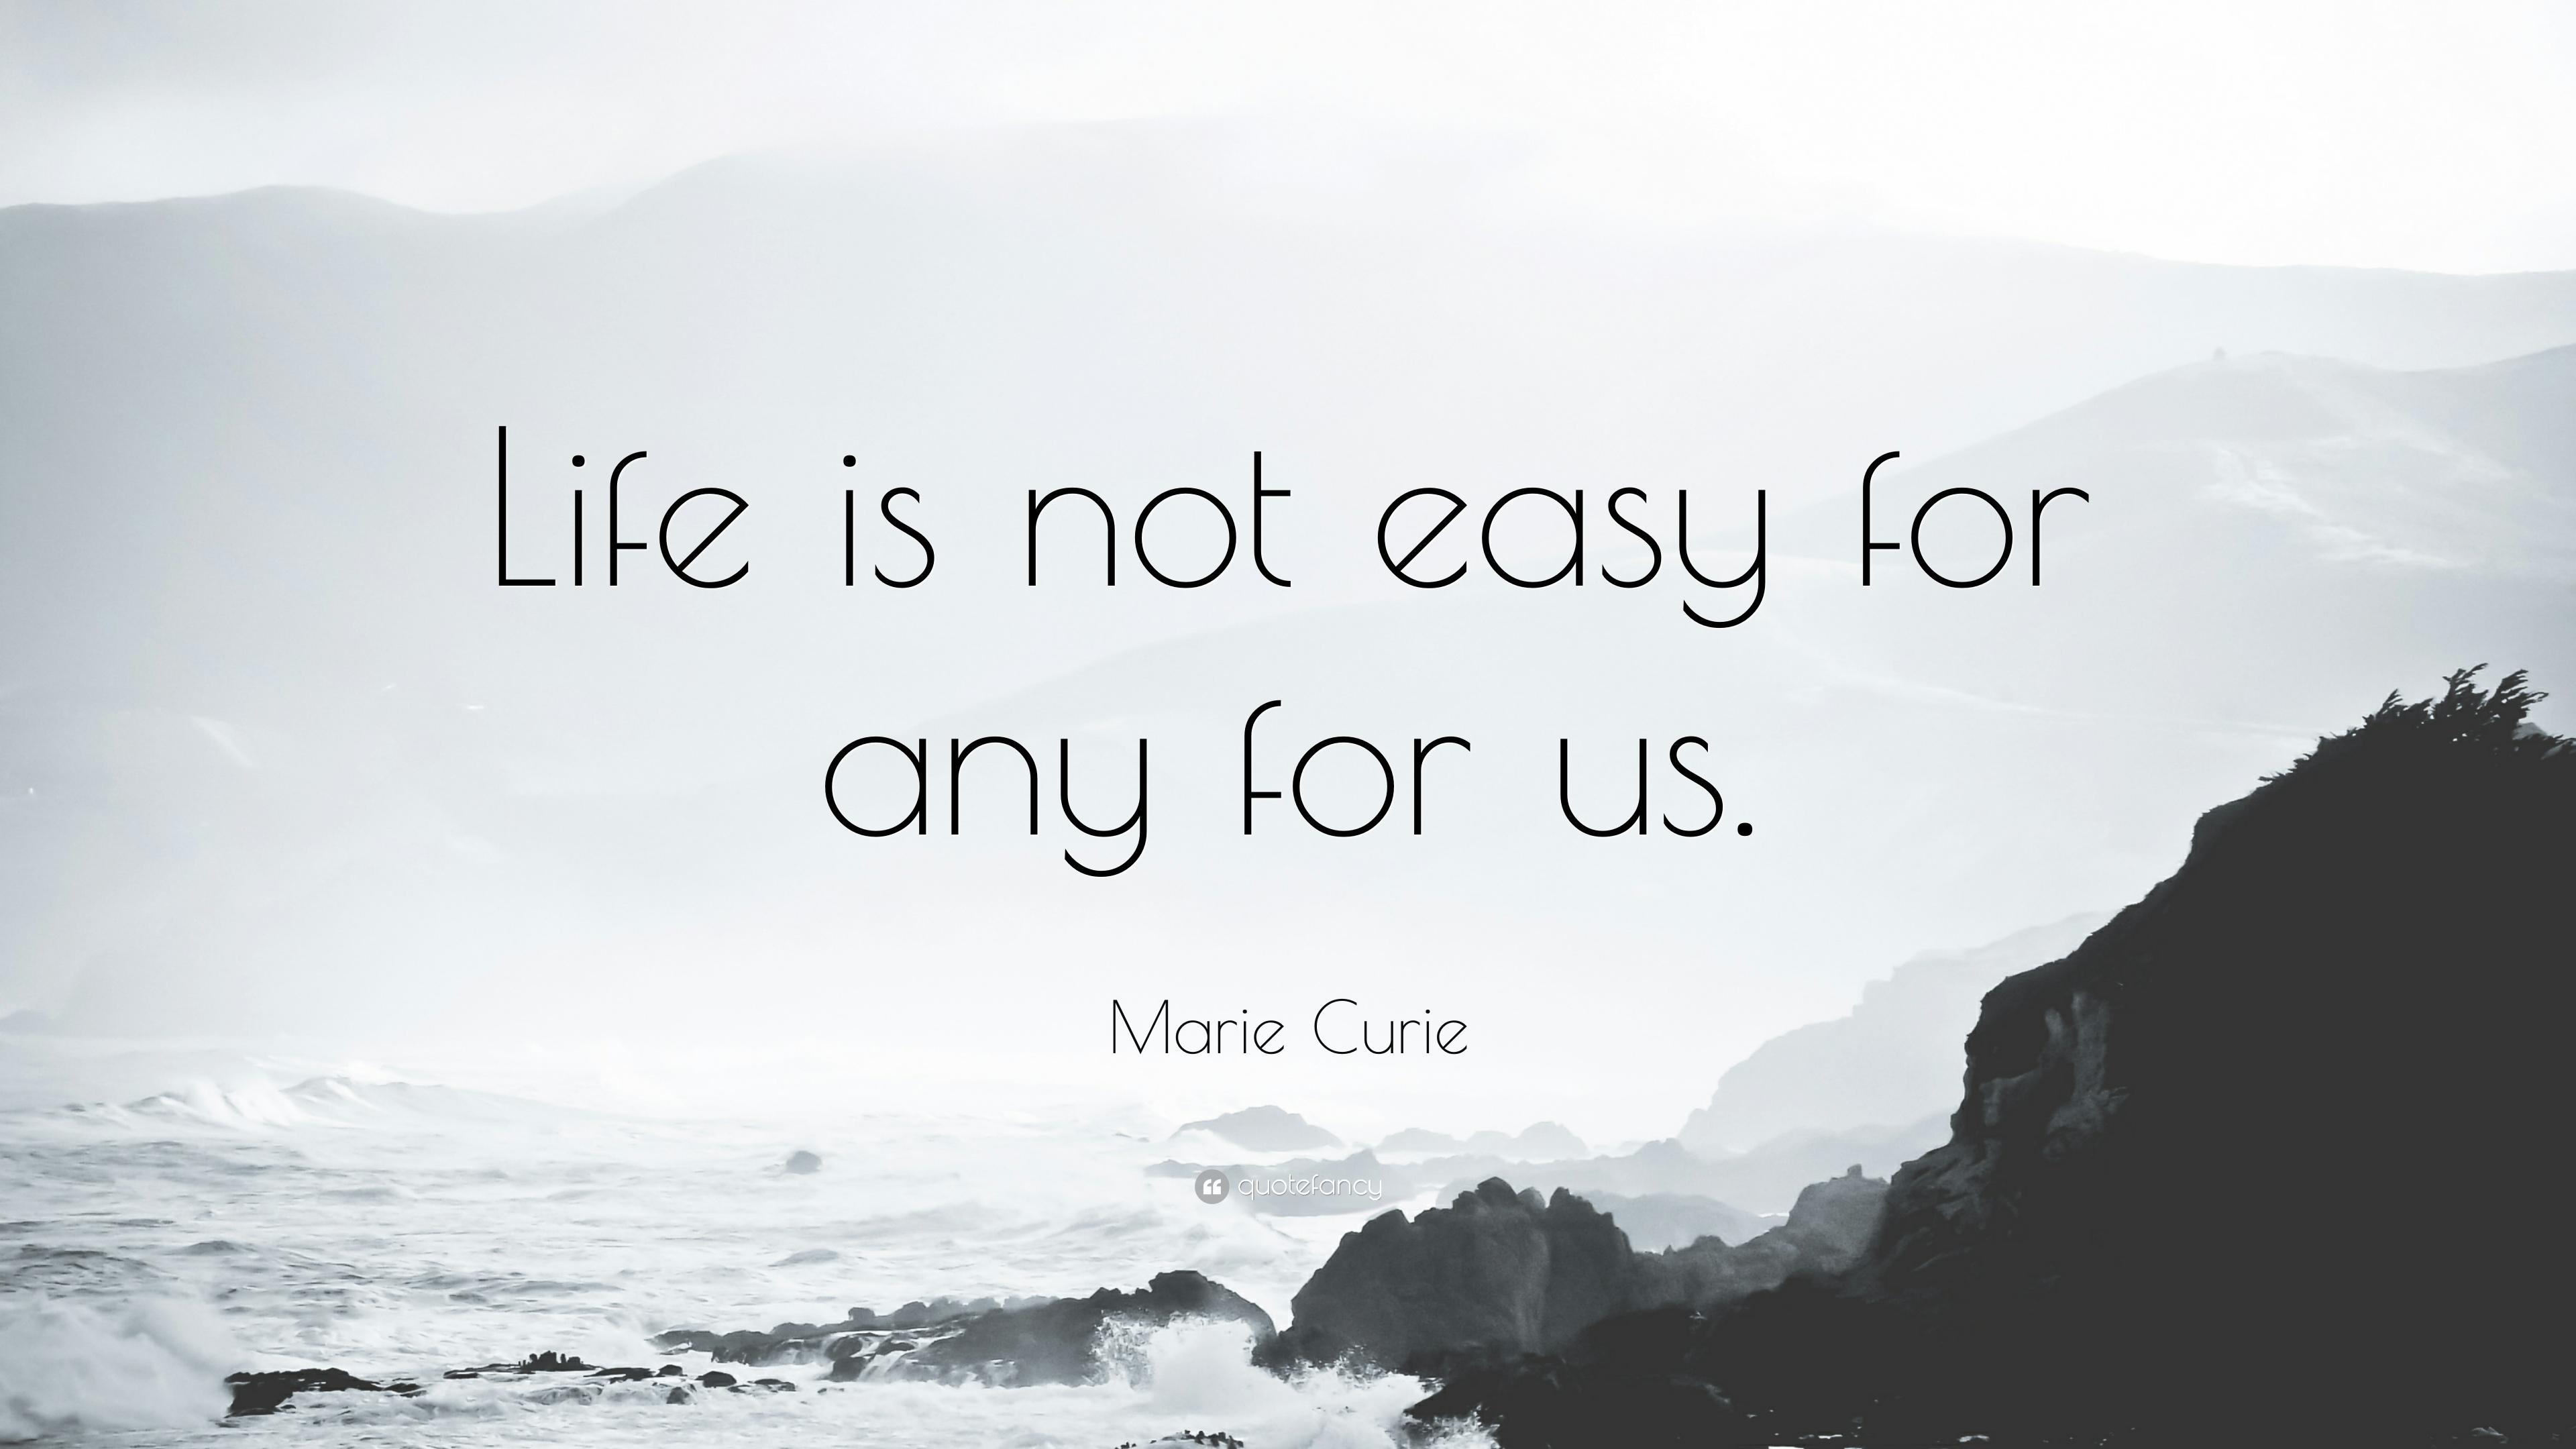 Marie Curie Quote: “Life is not easy for any for us.” 10